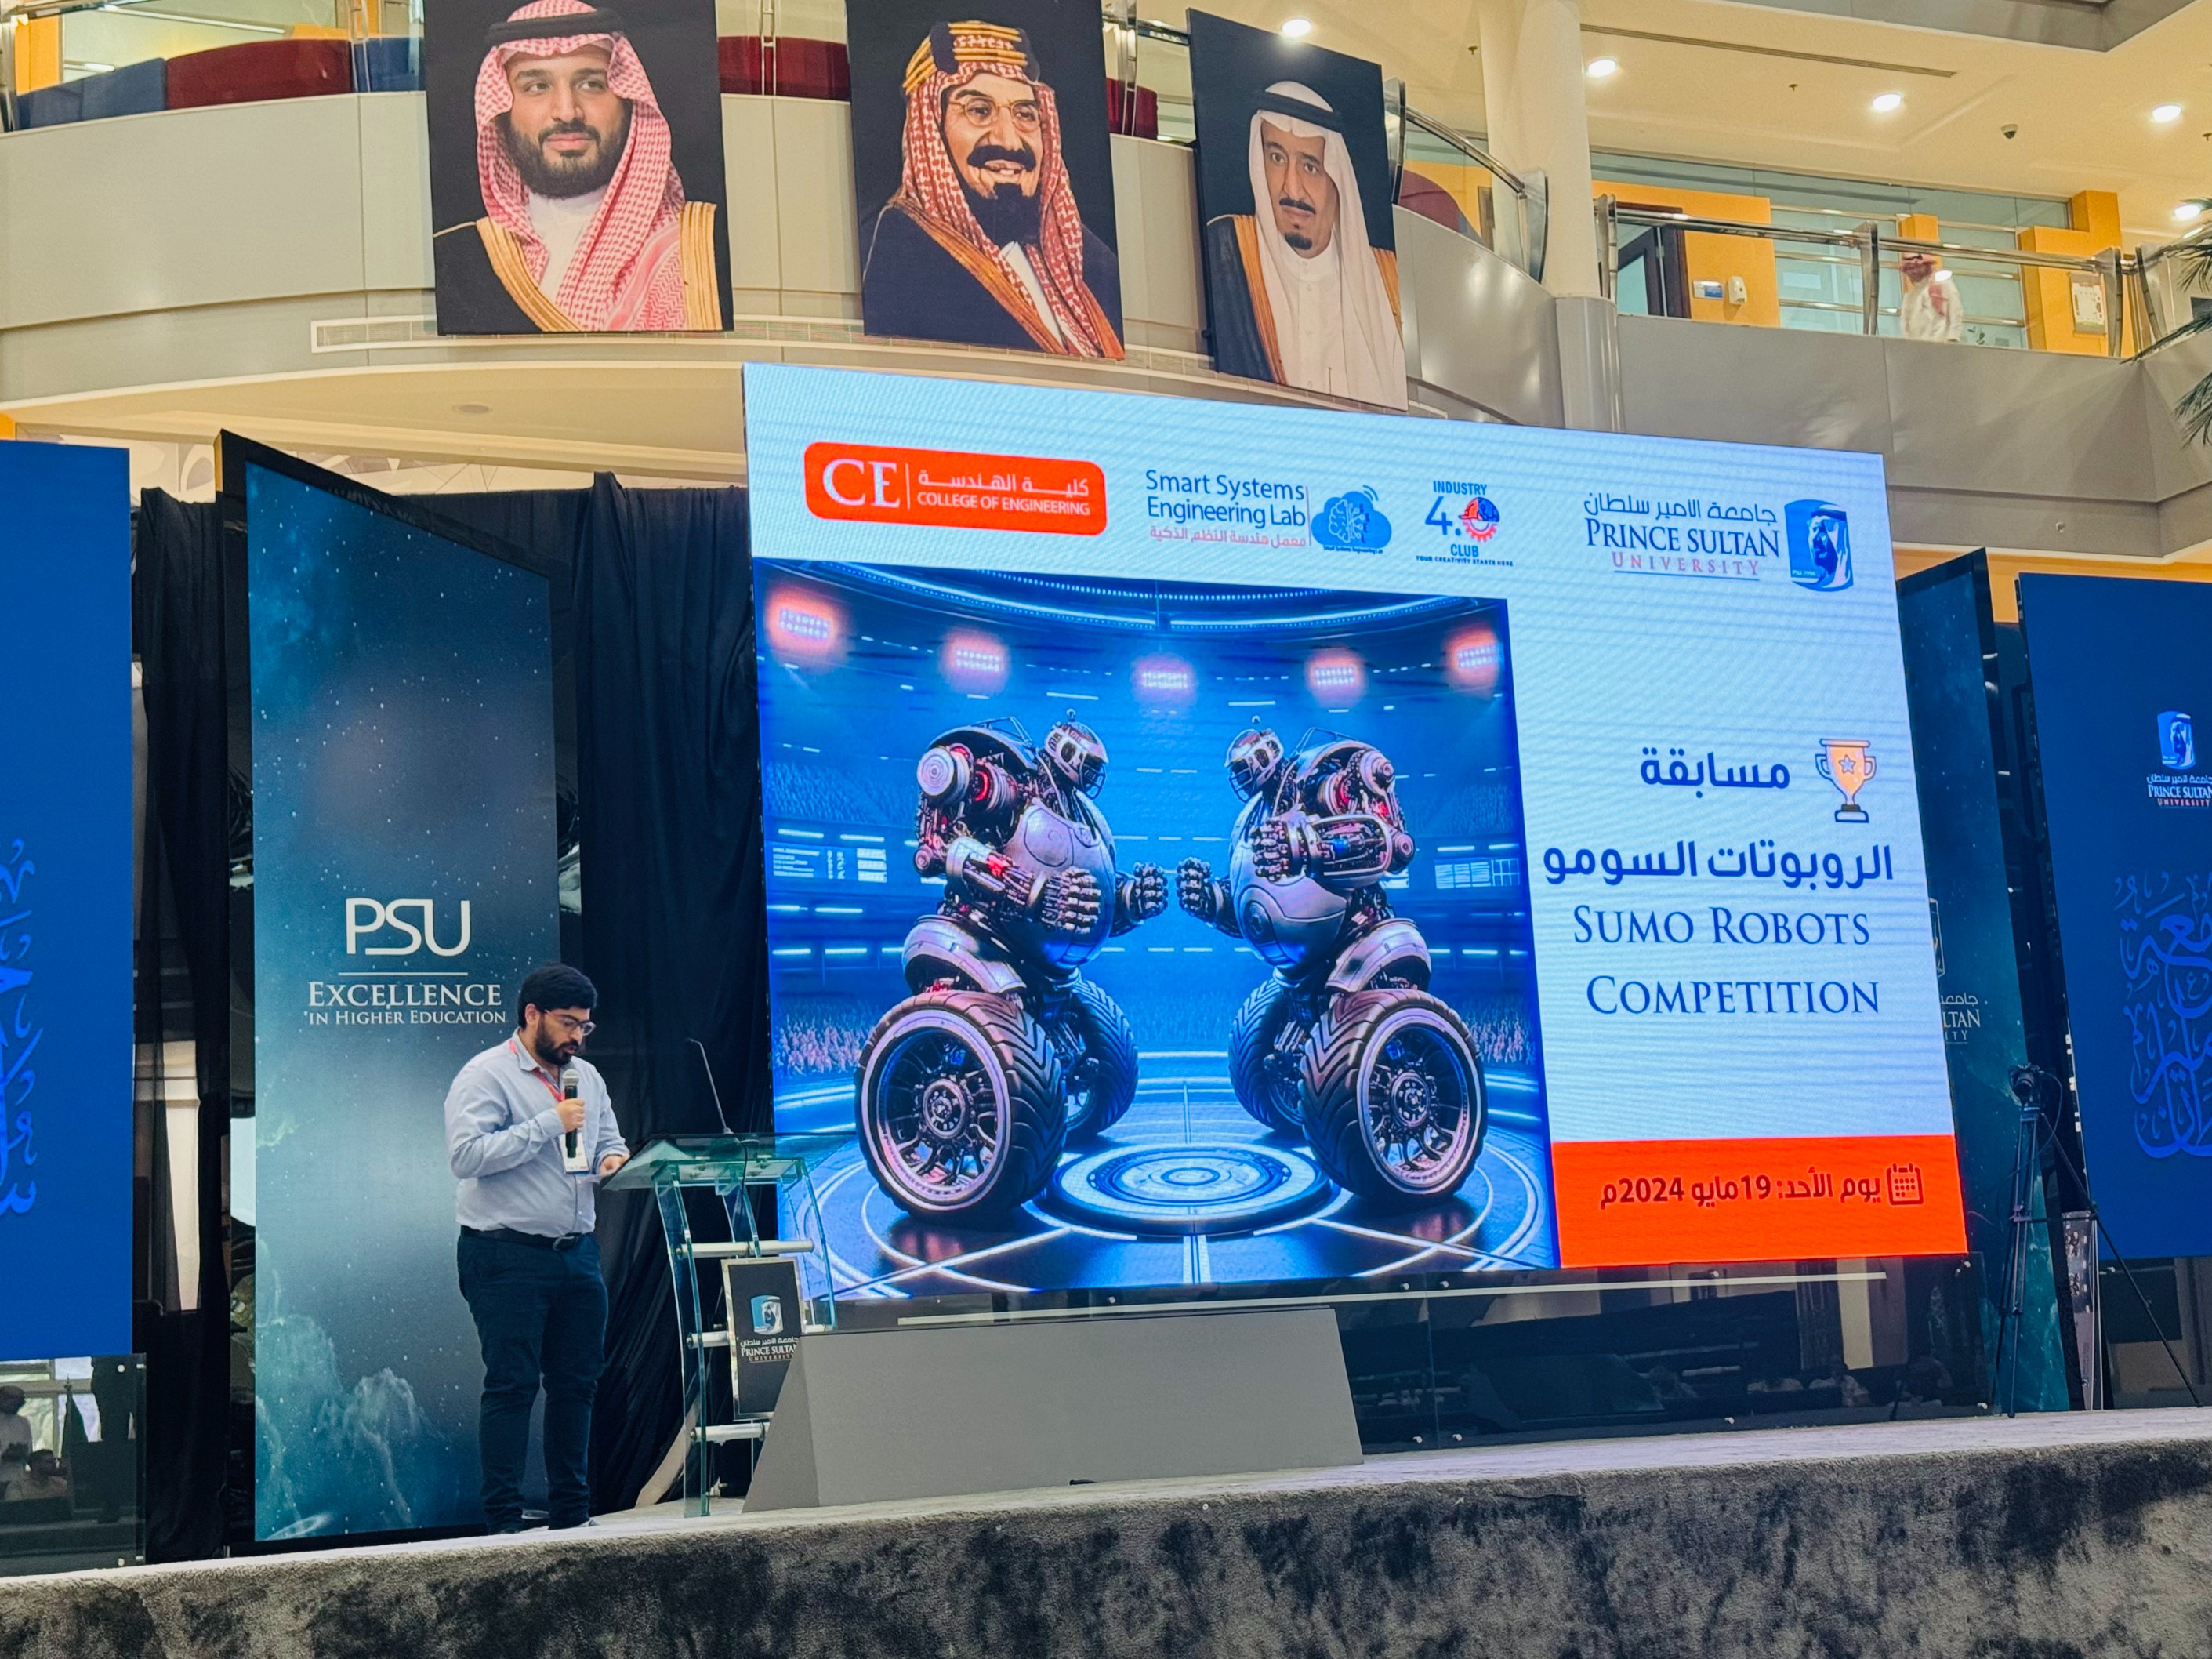 Finale of the Sumo Robot Competition at Prince Sultan University